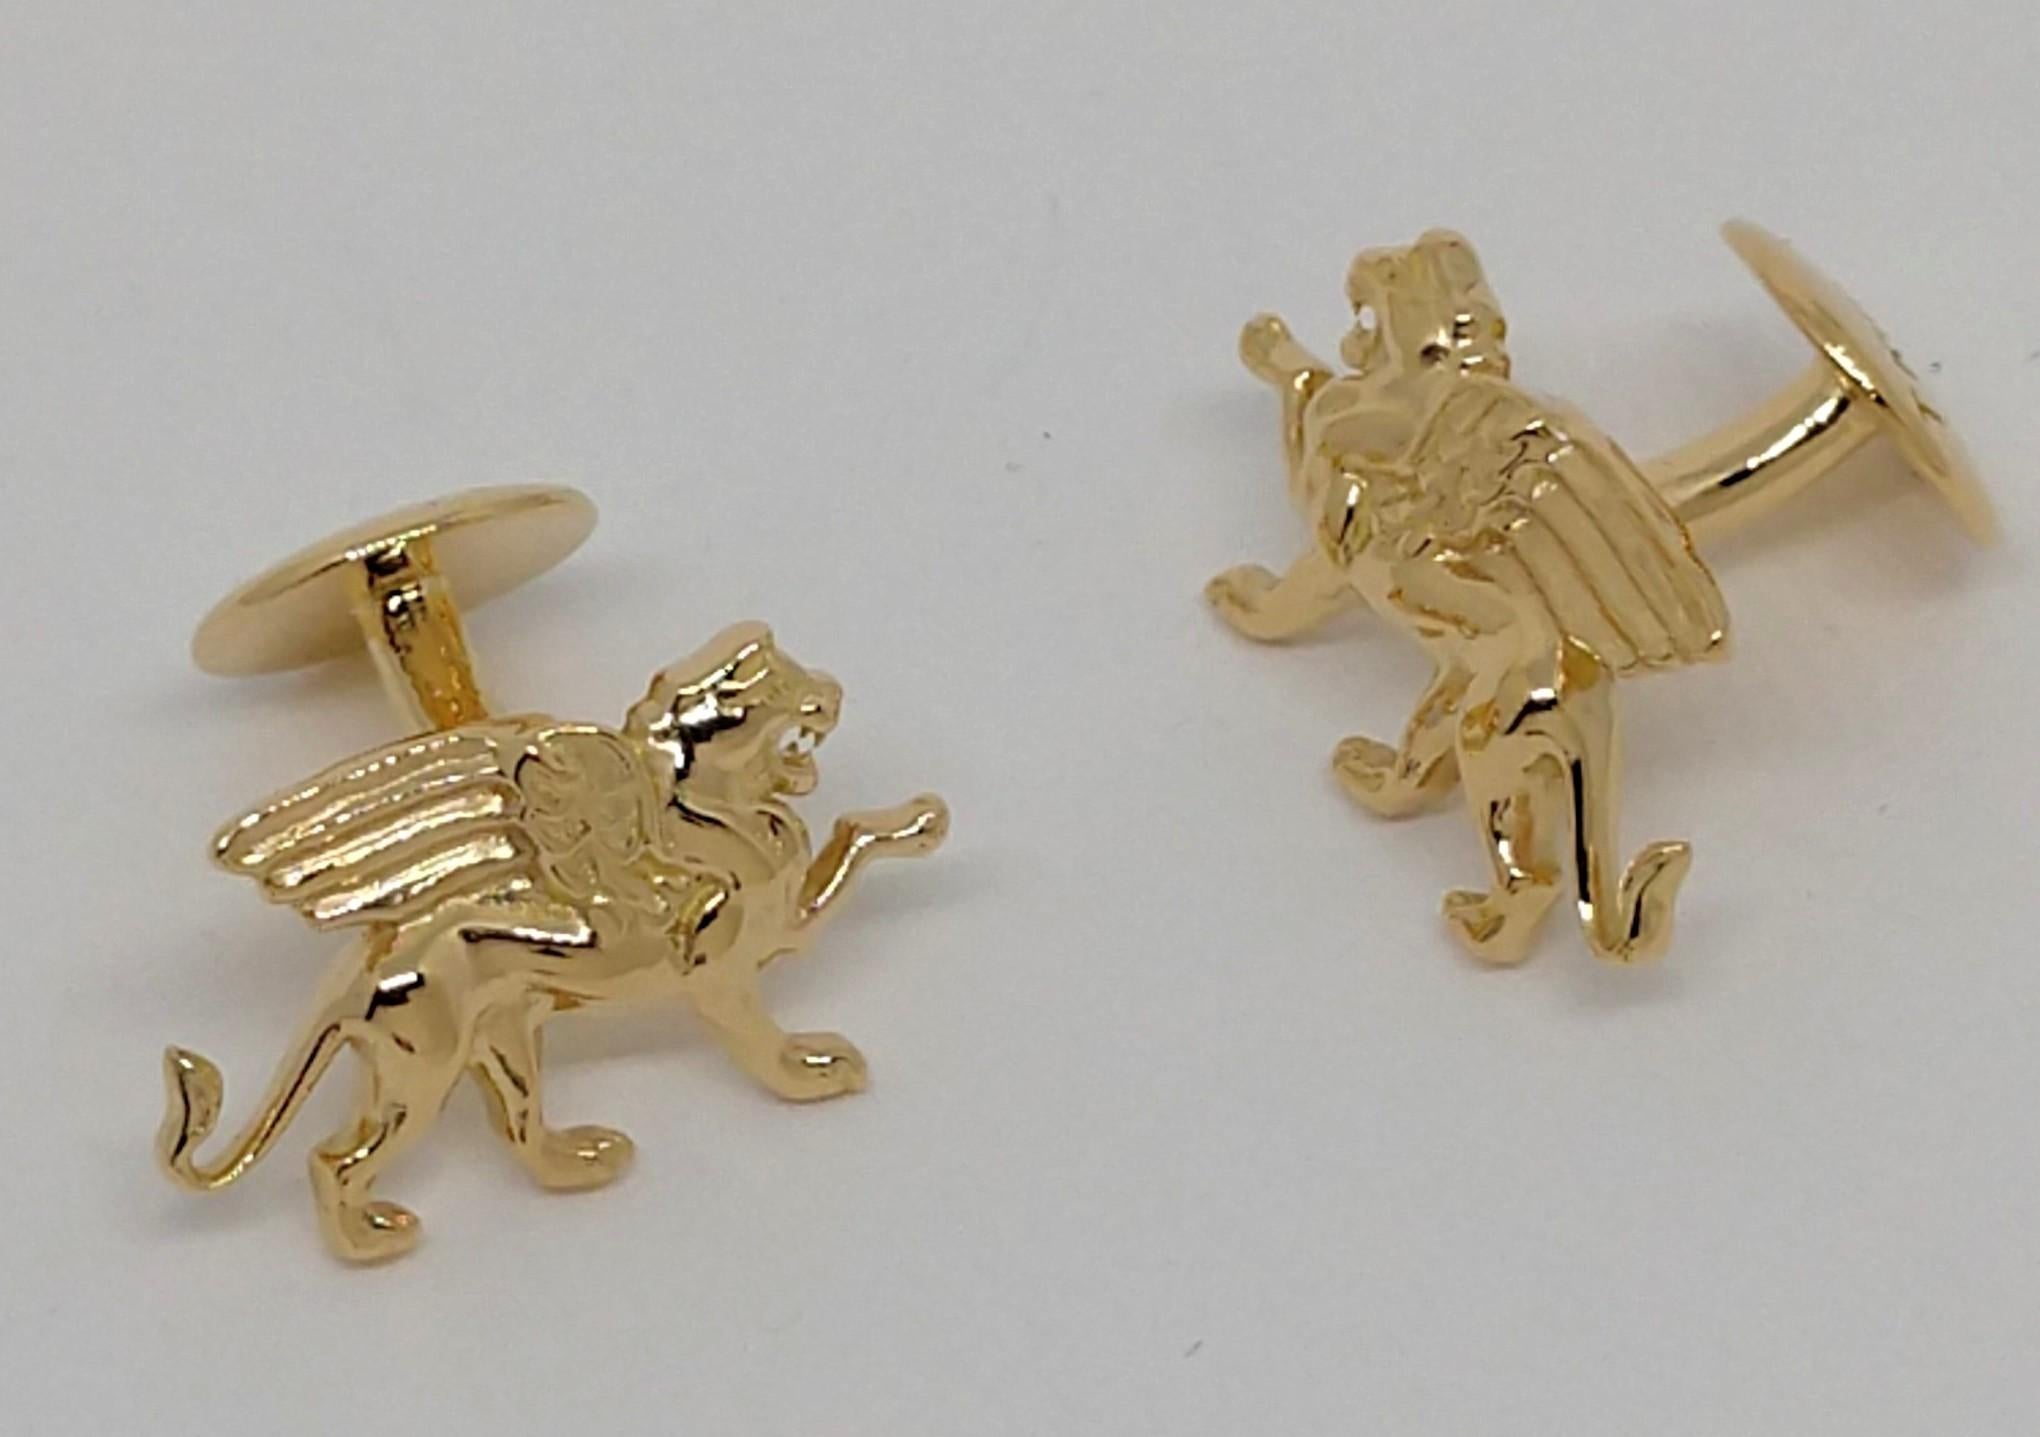 18 Karat Yellow Gold Vermeil Winged Griffin Cufflinks  Tiffany designer , Thomas Kurilla created this for 1st dibs exclusively. Sculpture is my passion. This griffin is getting ready to take on his enemy 4 teeth and all. Vermeil is 18k gold micron